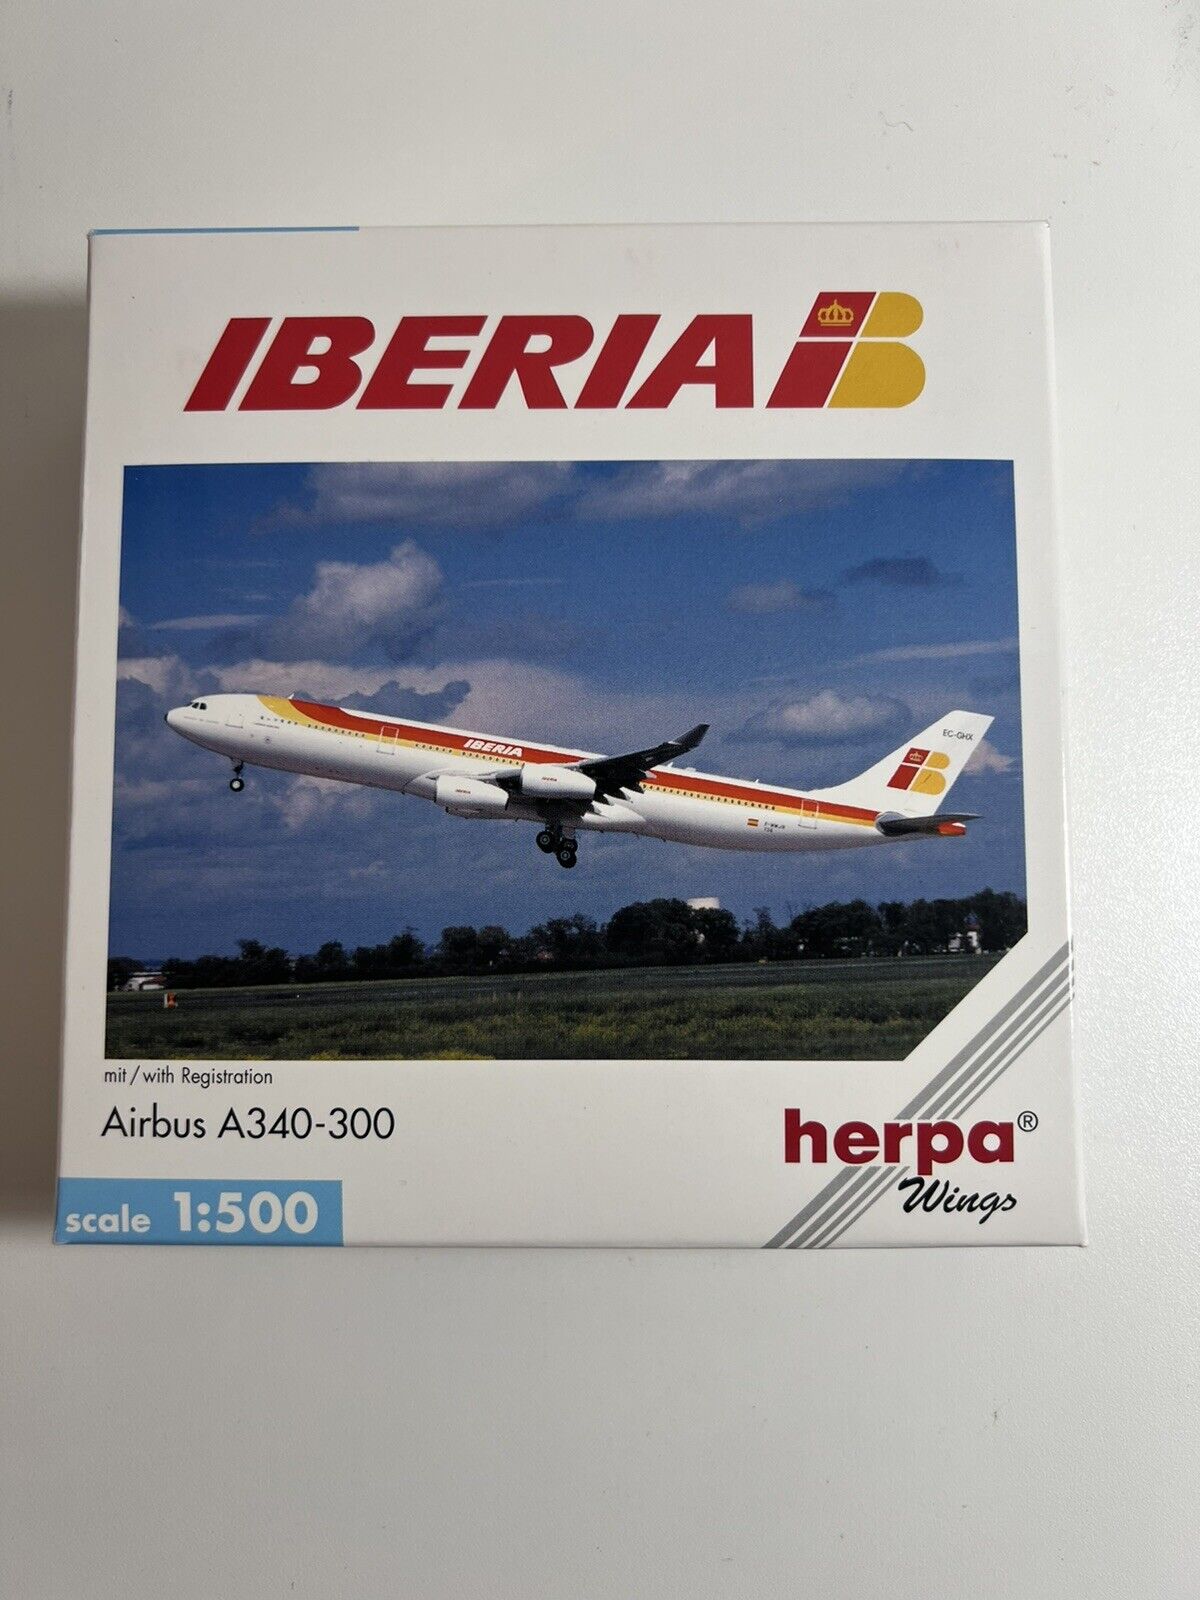 HERPA 504645 IBERIA AIRBUS A340-300 NG 1-500 SCALE  